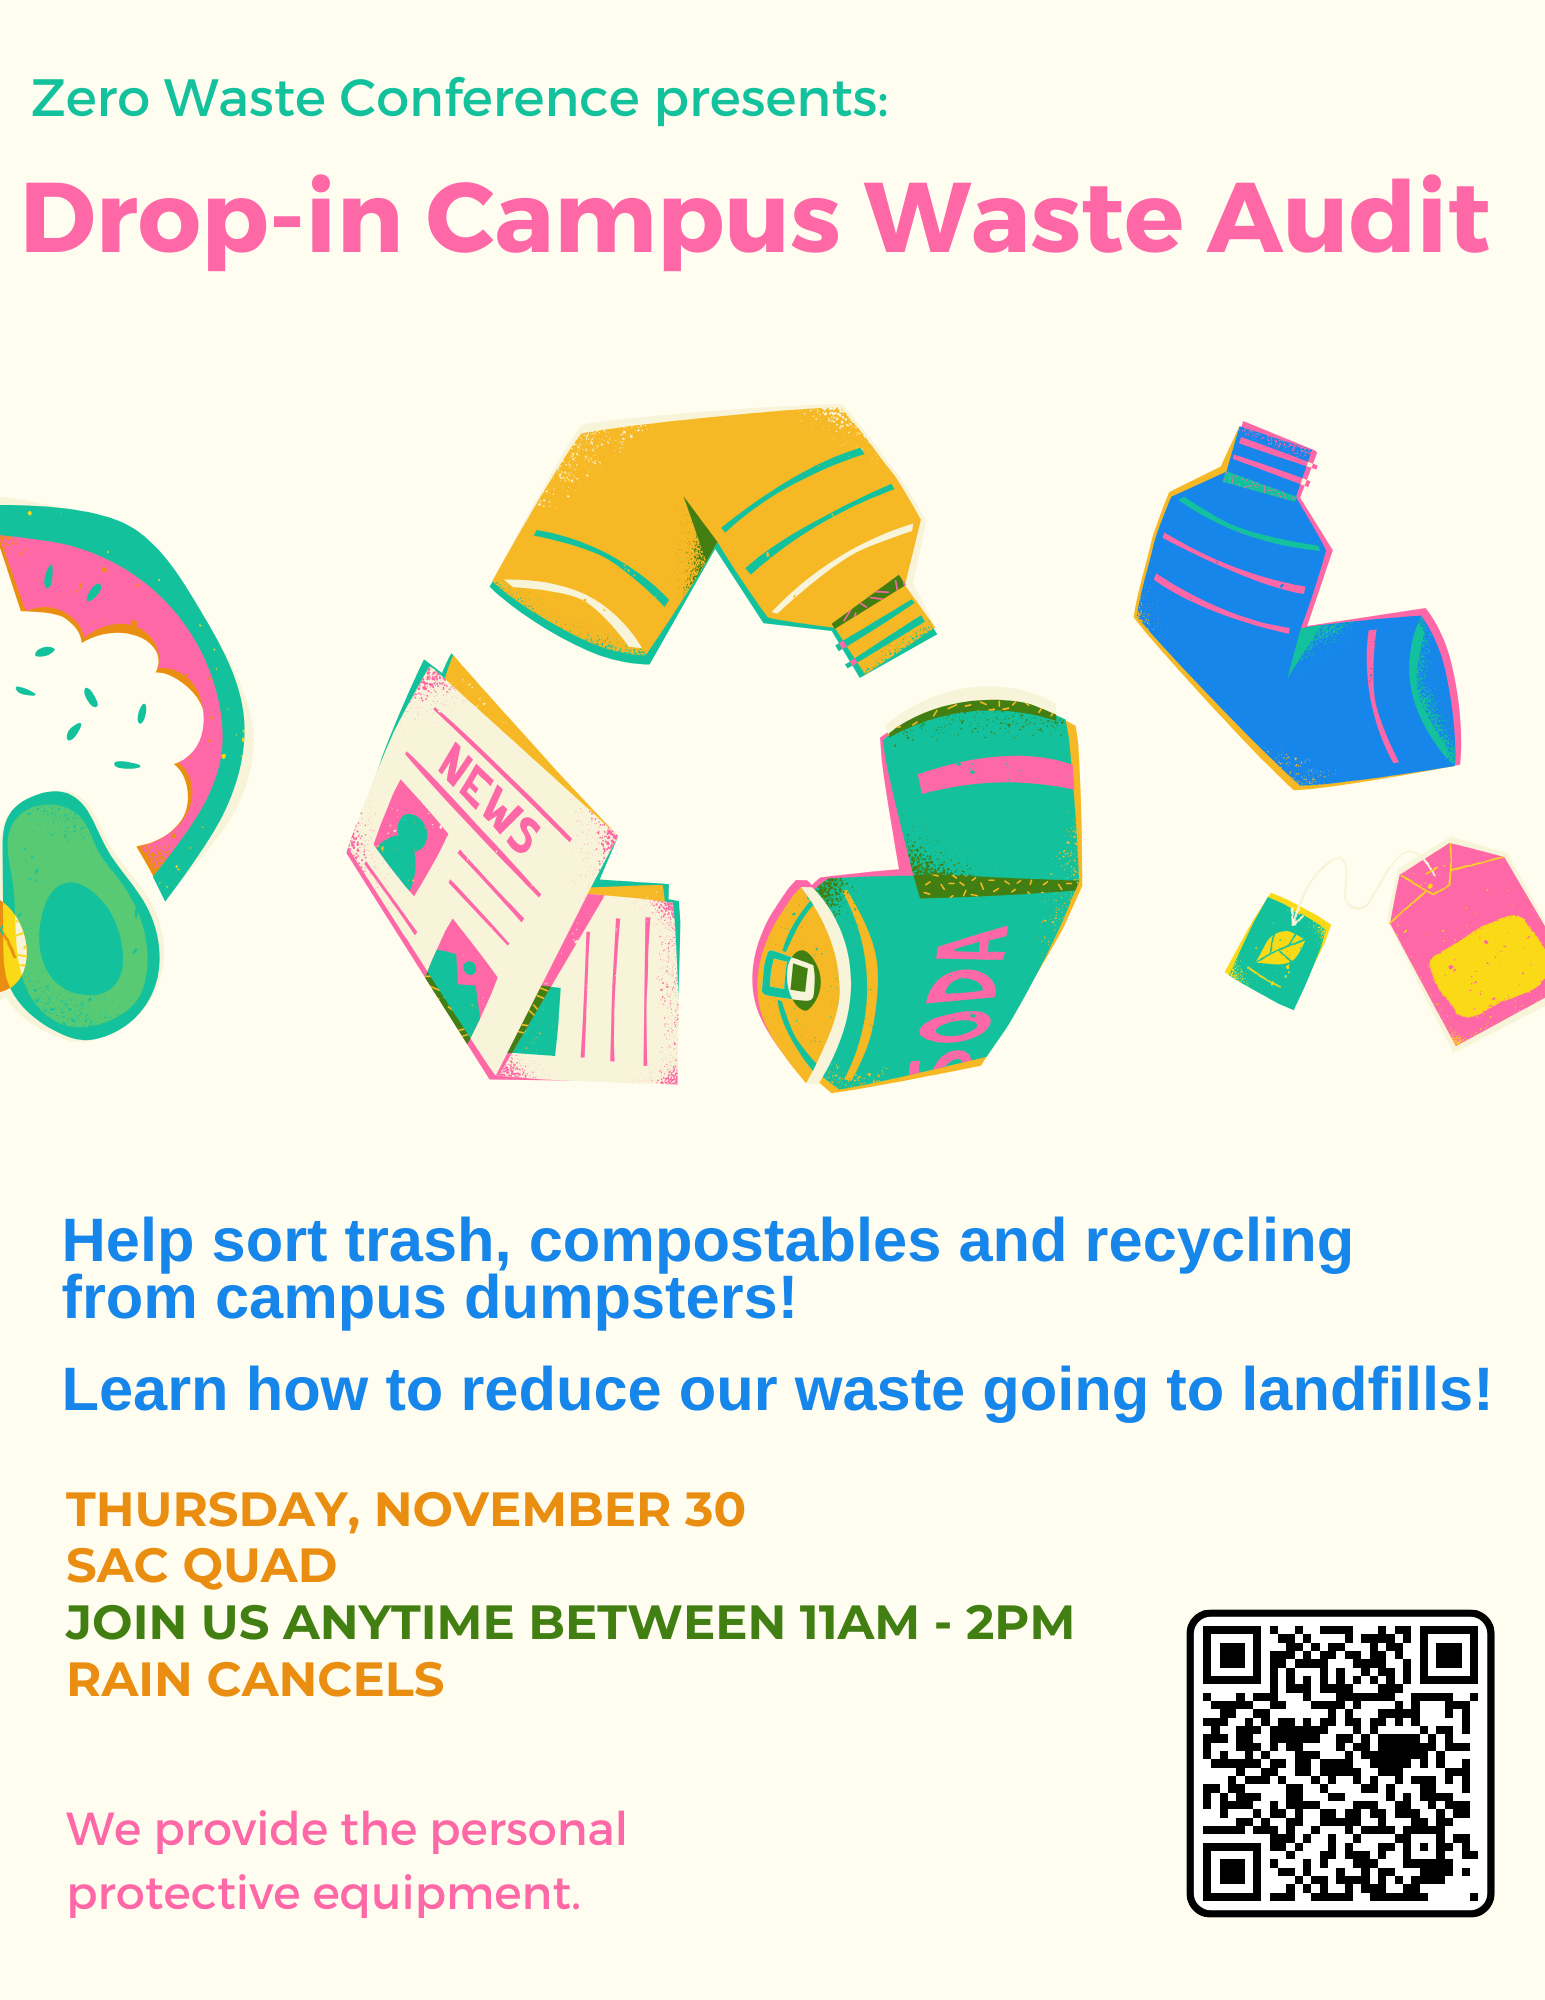 flier for a drop-in waste audit, November 30 from 11-2pm on the SAC Quad.